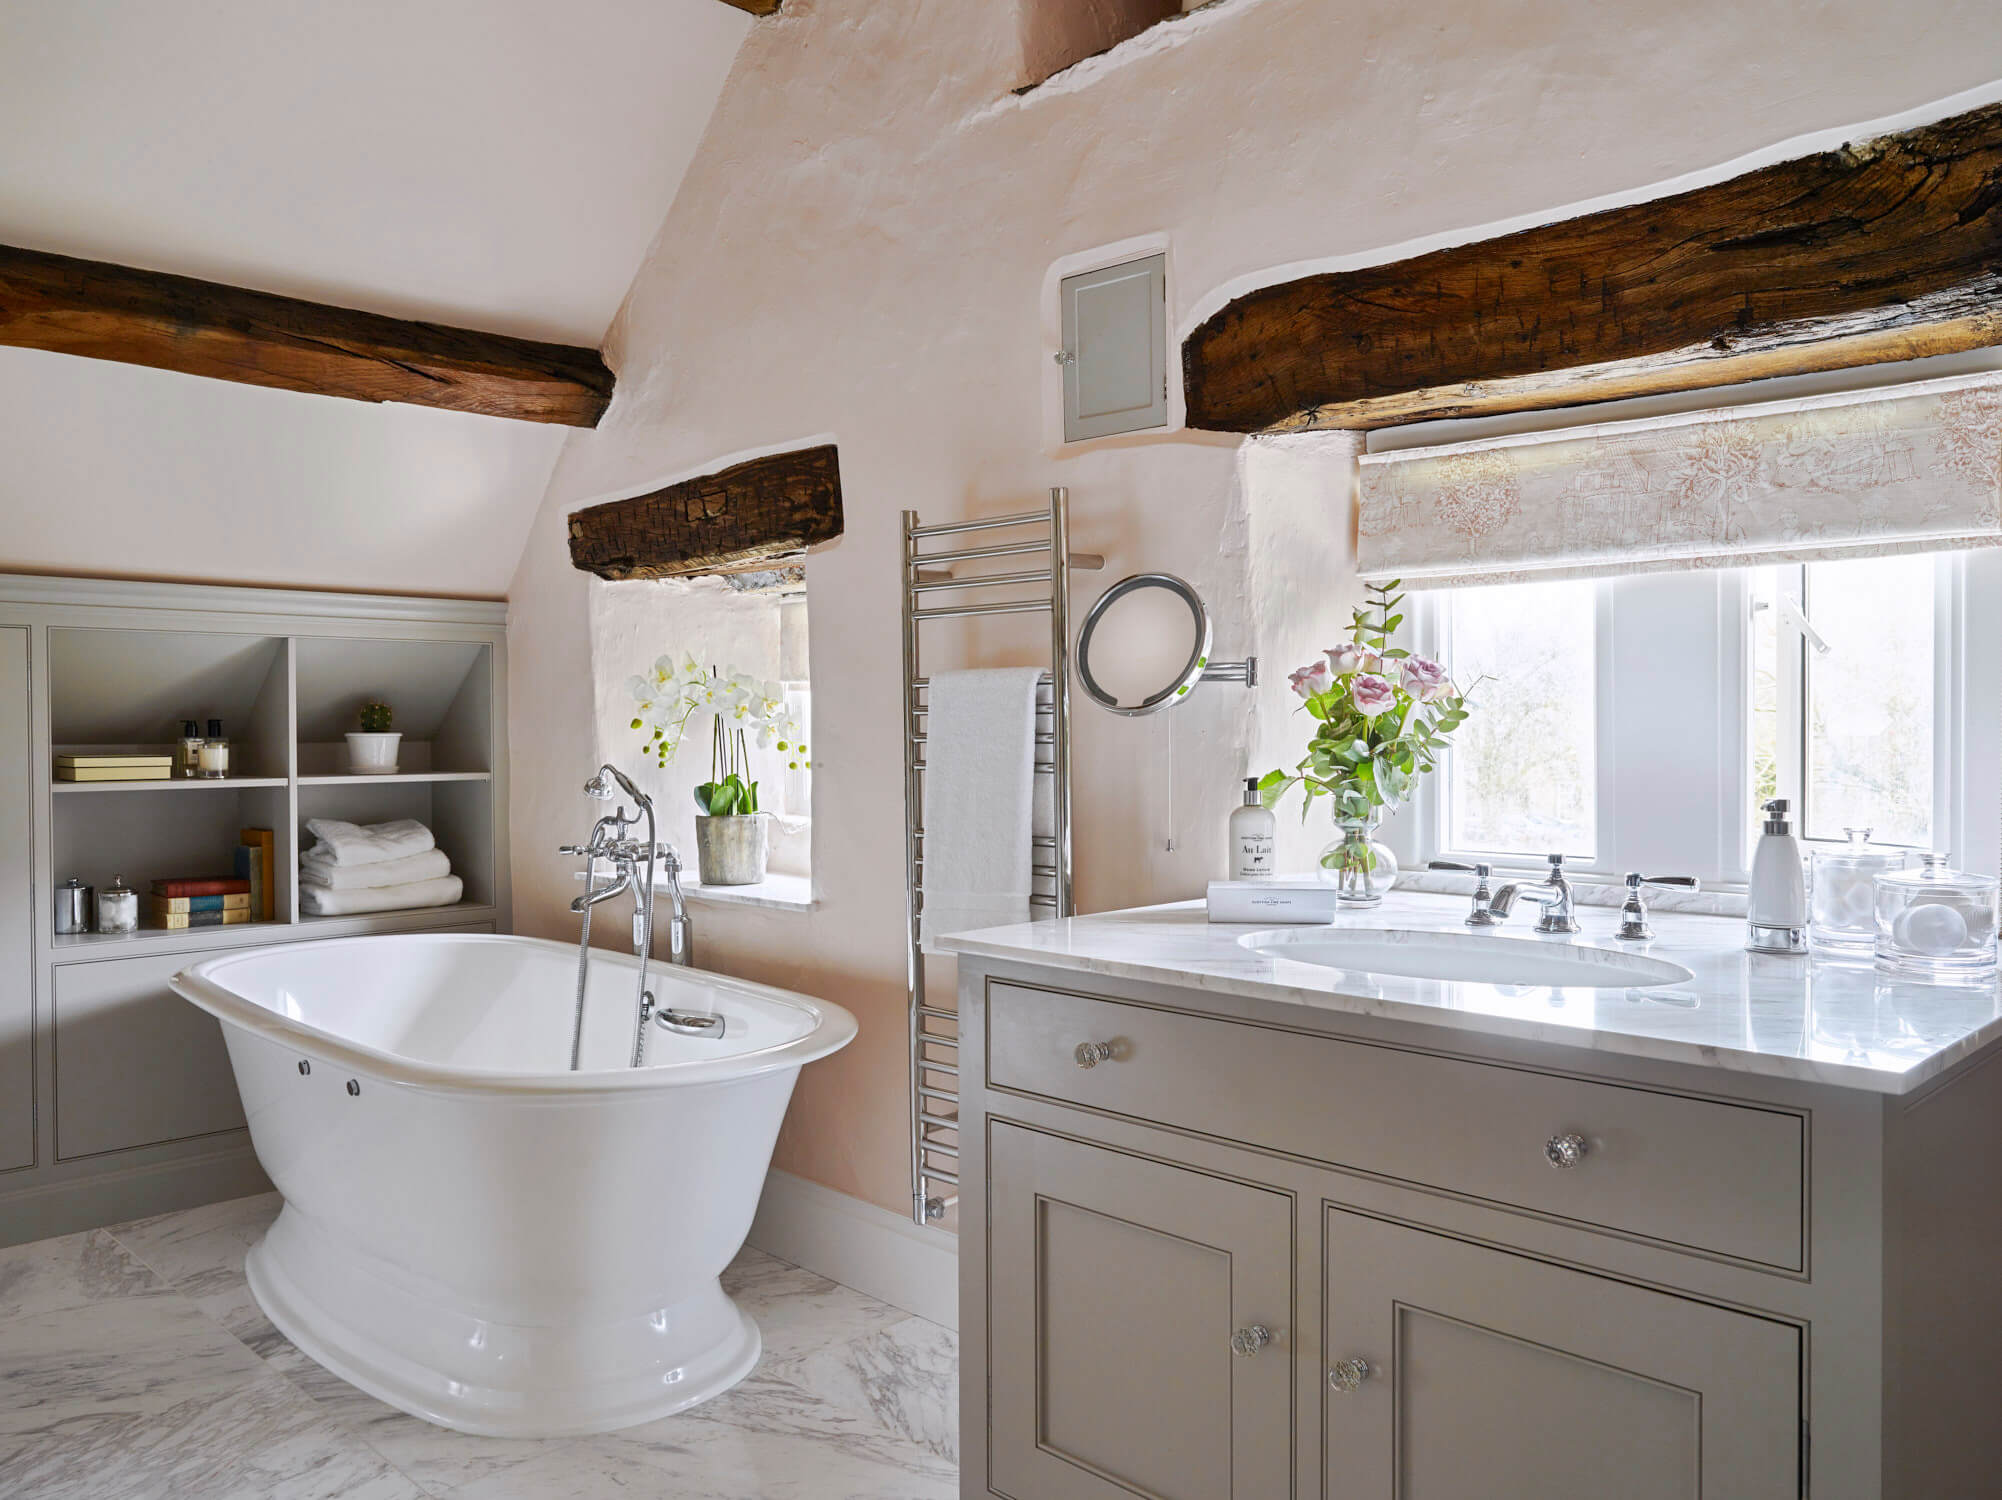 15+ Ideas of Charming Bathrooms With Wooden Beams (1)